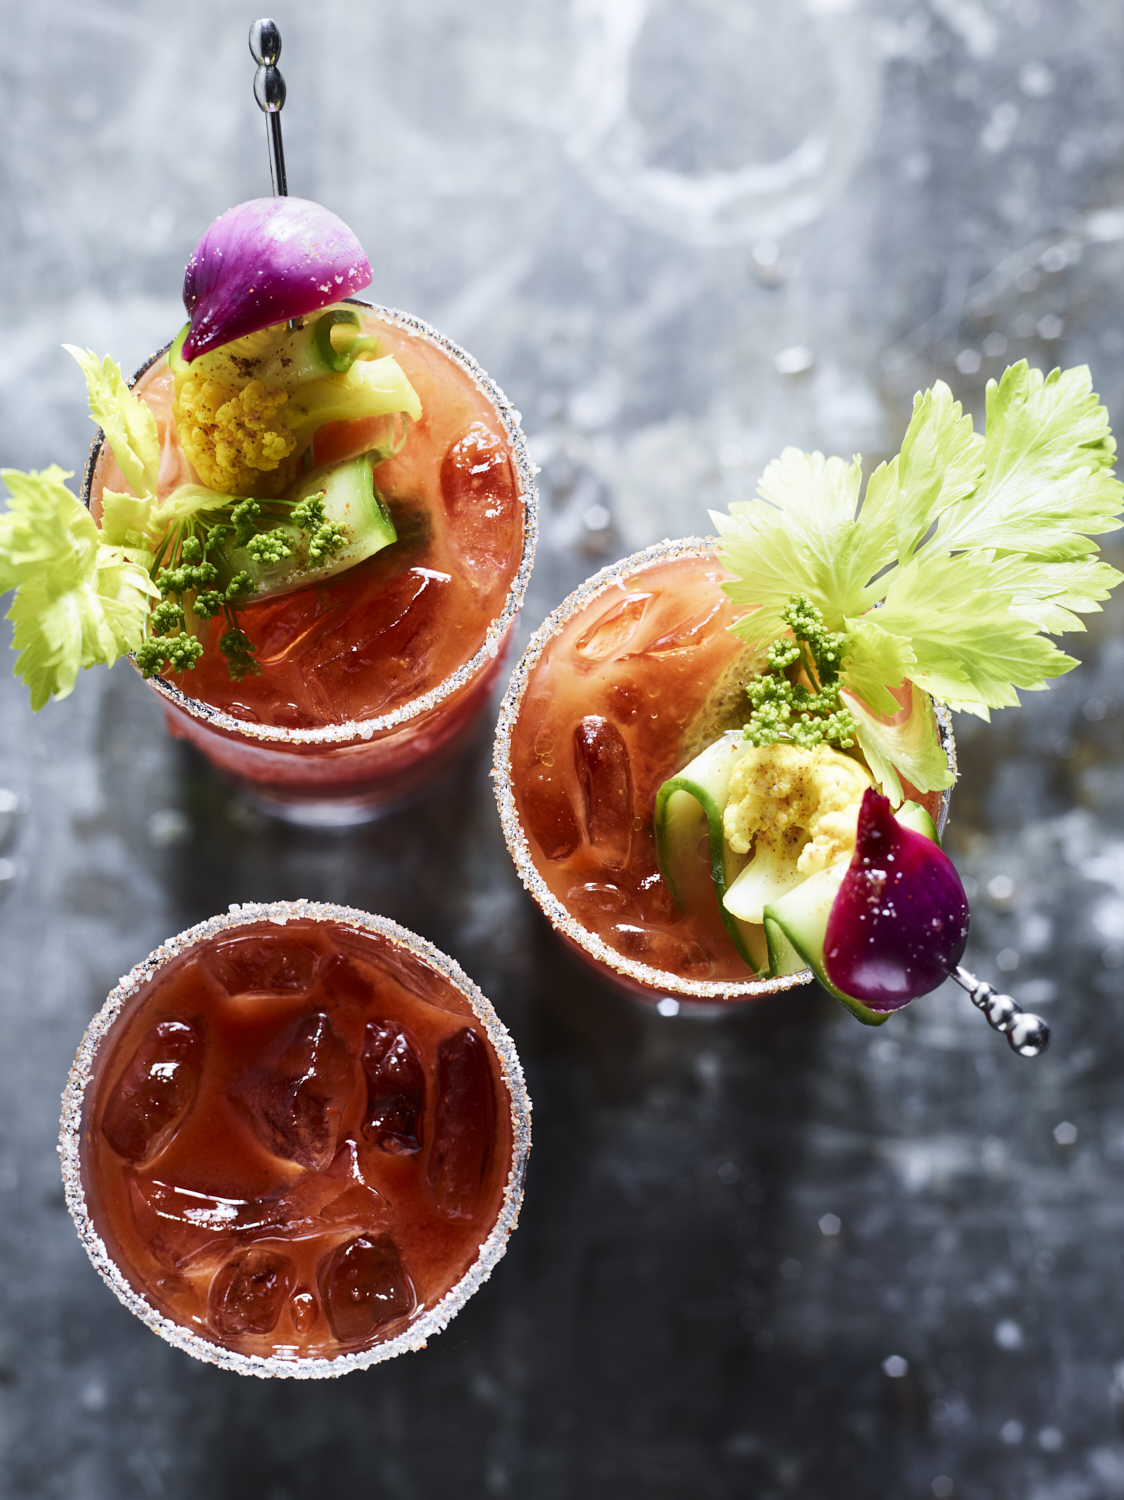 4 Easy Tips For Creating The Best Bloody Mary Bar At Your Next Tailgate Williams Sonoma Taste,Best Sheets To Buy To Keep Cool